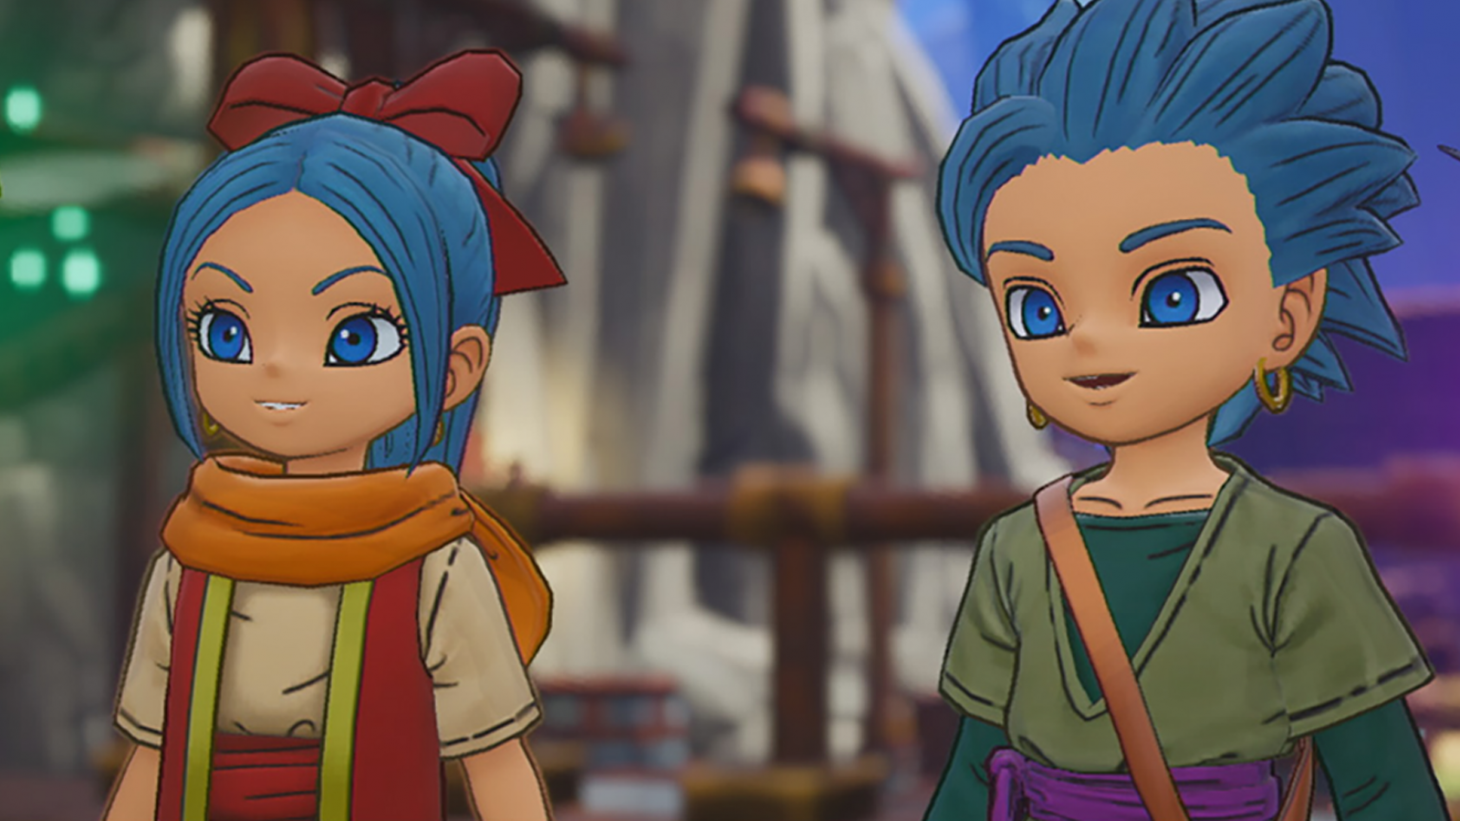 Dragon Quest Treasures Review - A Tedious Trove - Game Informer